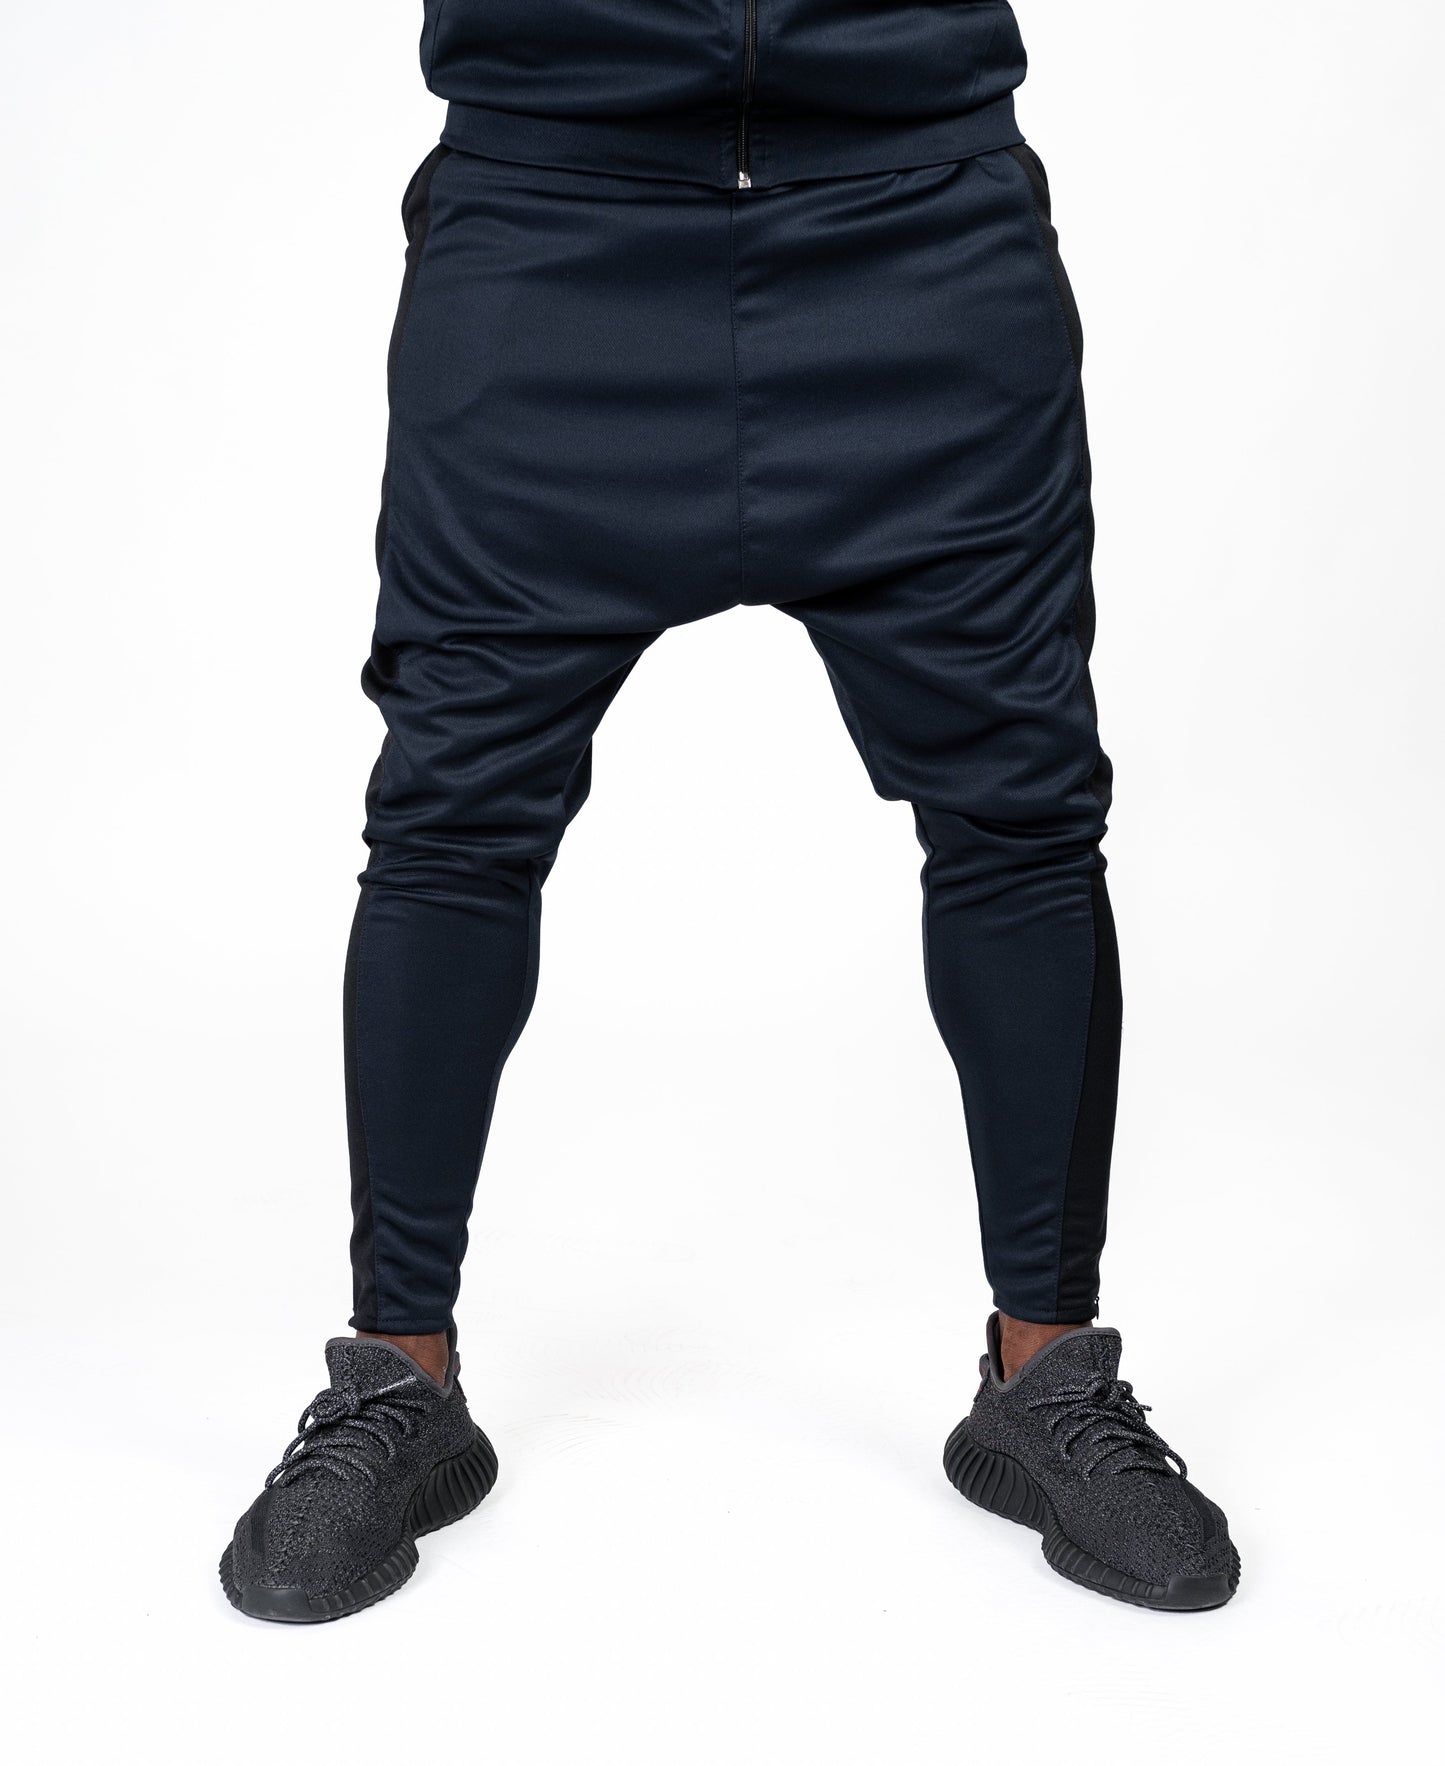 Bleumarin trousers with big black line - Fatai Style